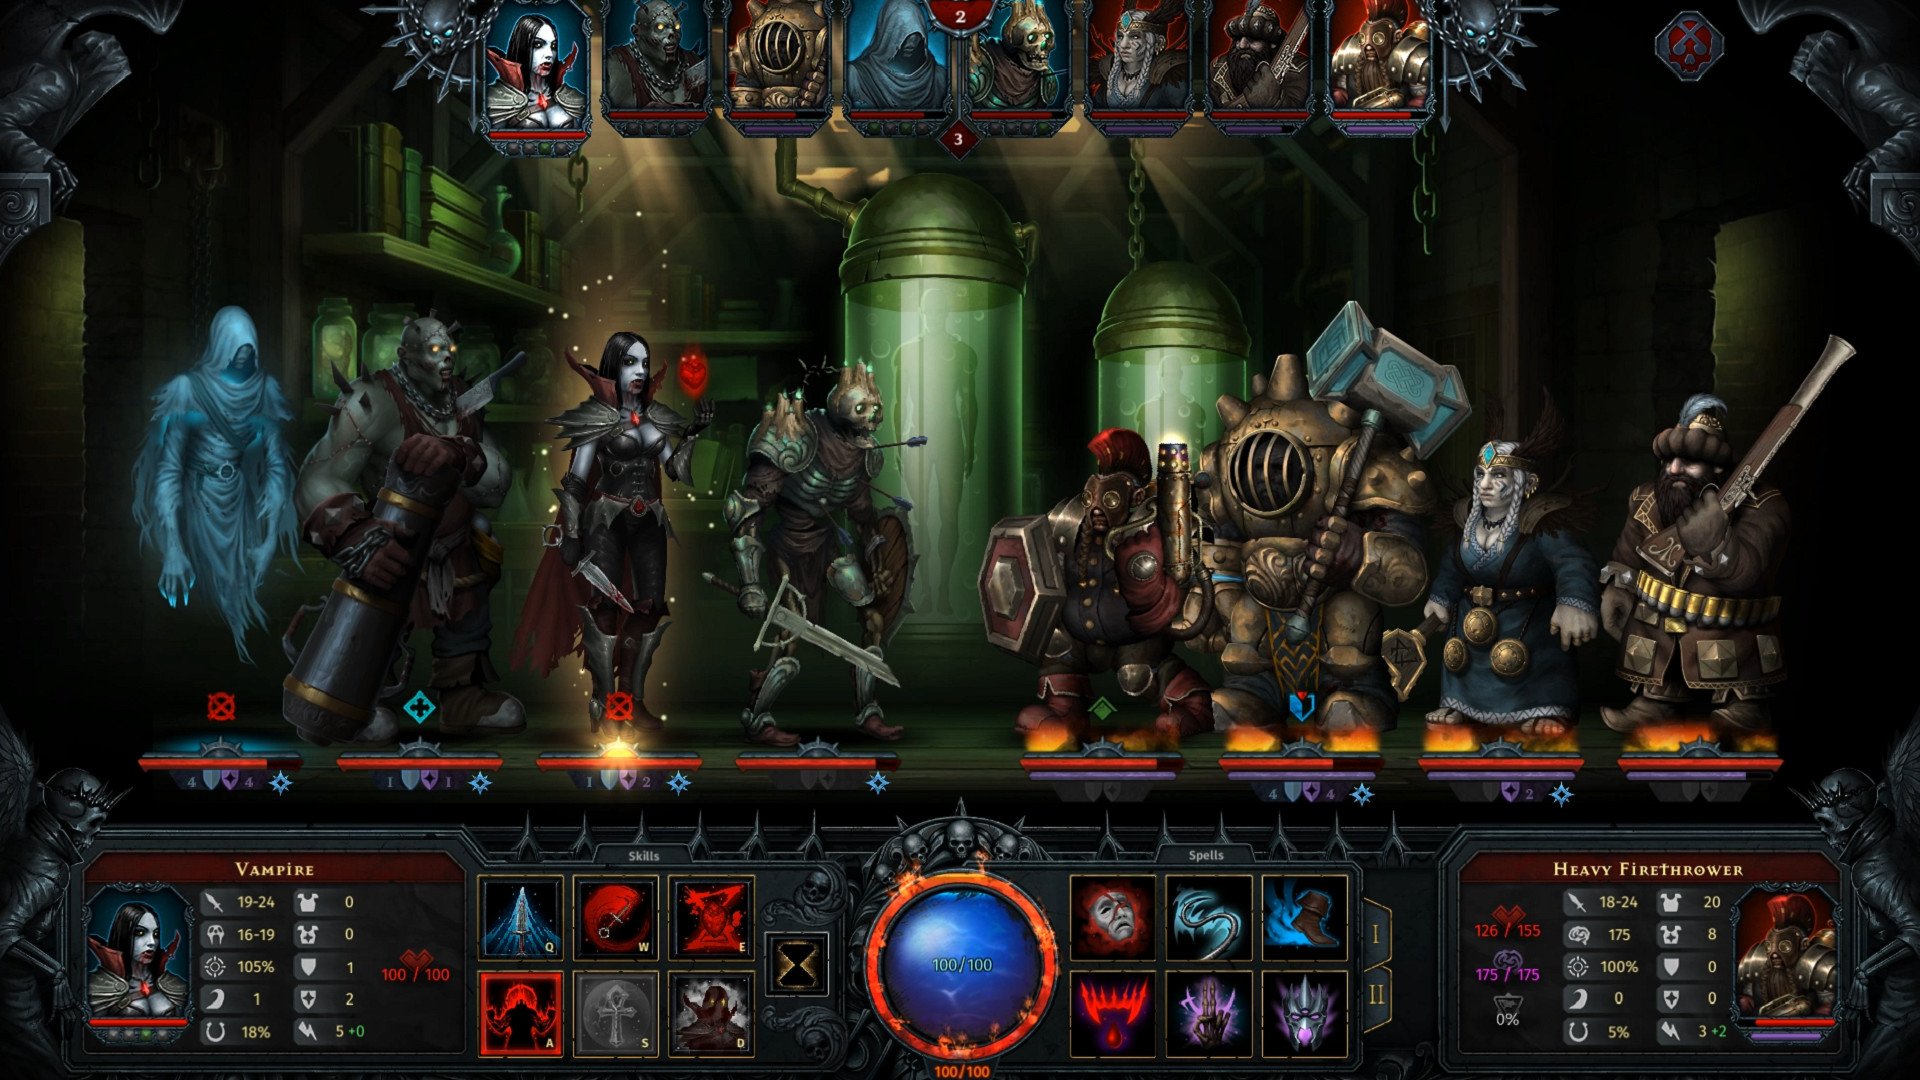 Screenshot for the game Iratus: Lord of the Dead v.181.02.00 [GOG] (2020) download torrent License